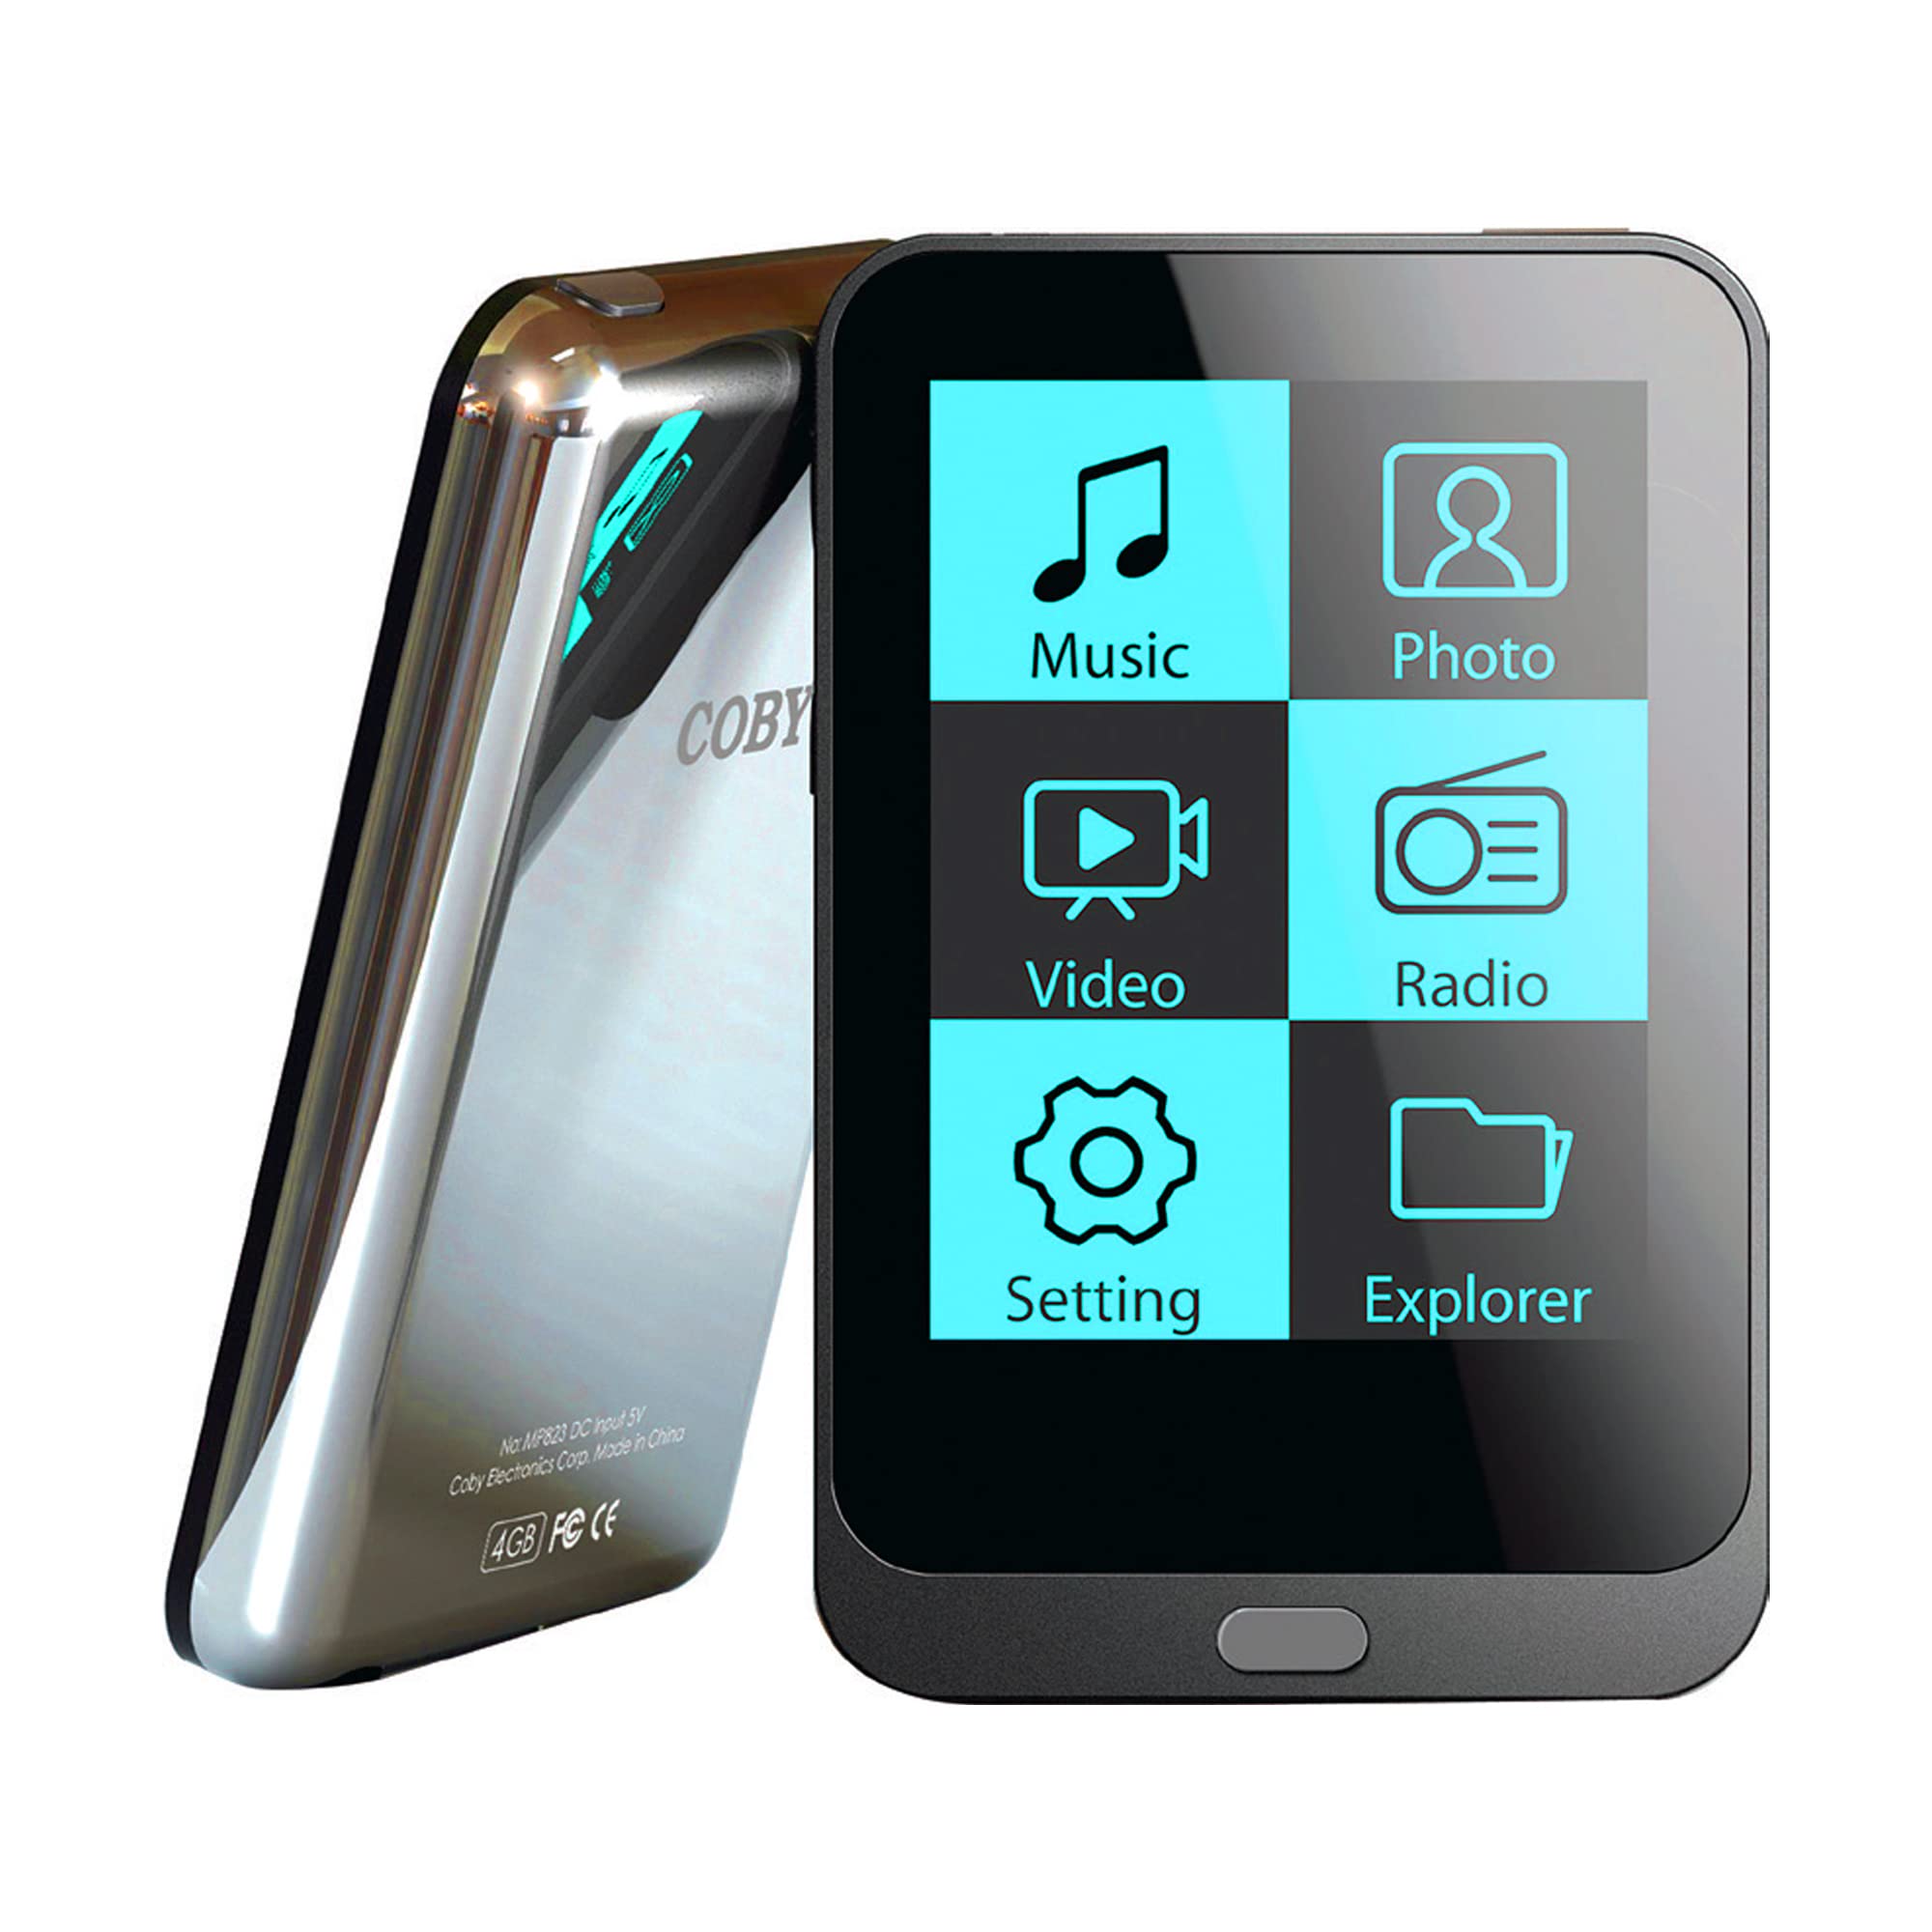 Coby 2-Inch 4GB Video MP3 Player